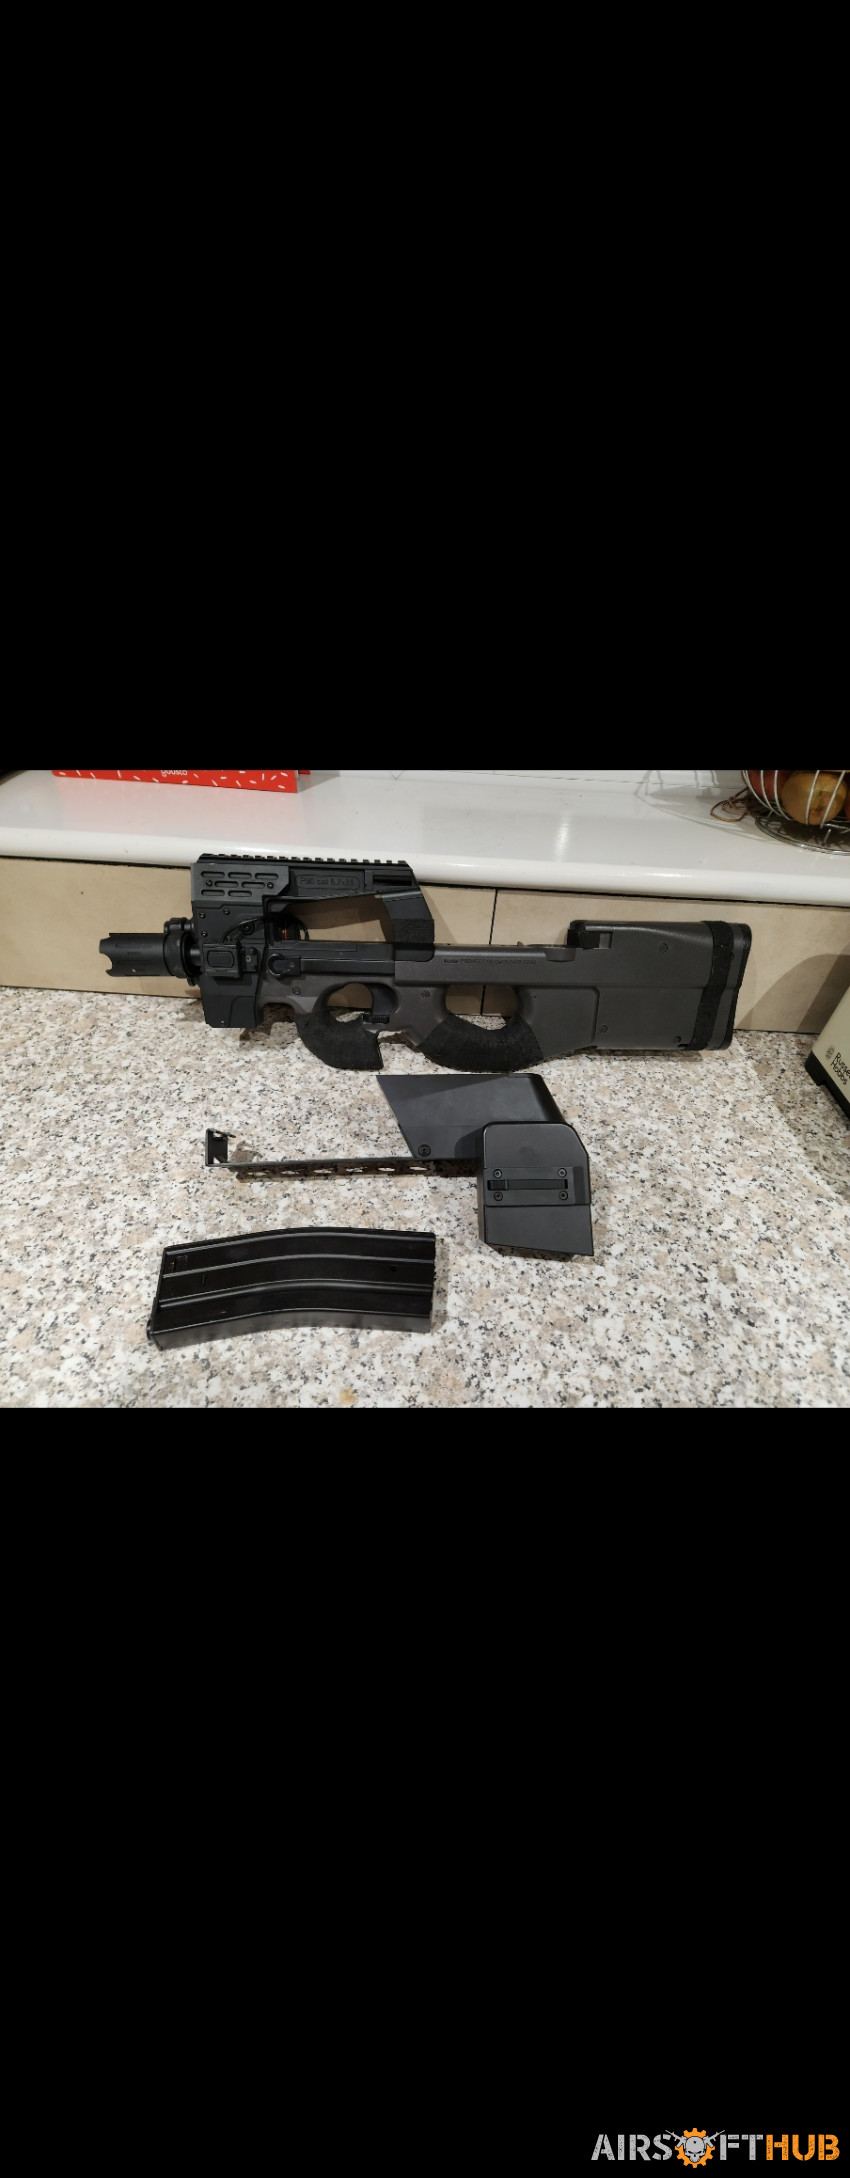 Upgraded Tokyo Marui P90 - Used airsoft equipment